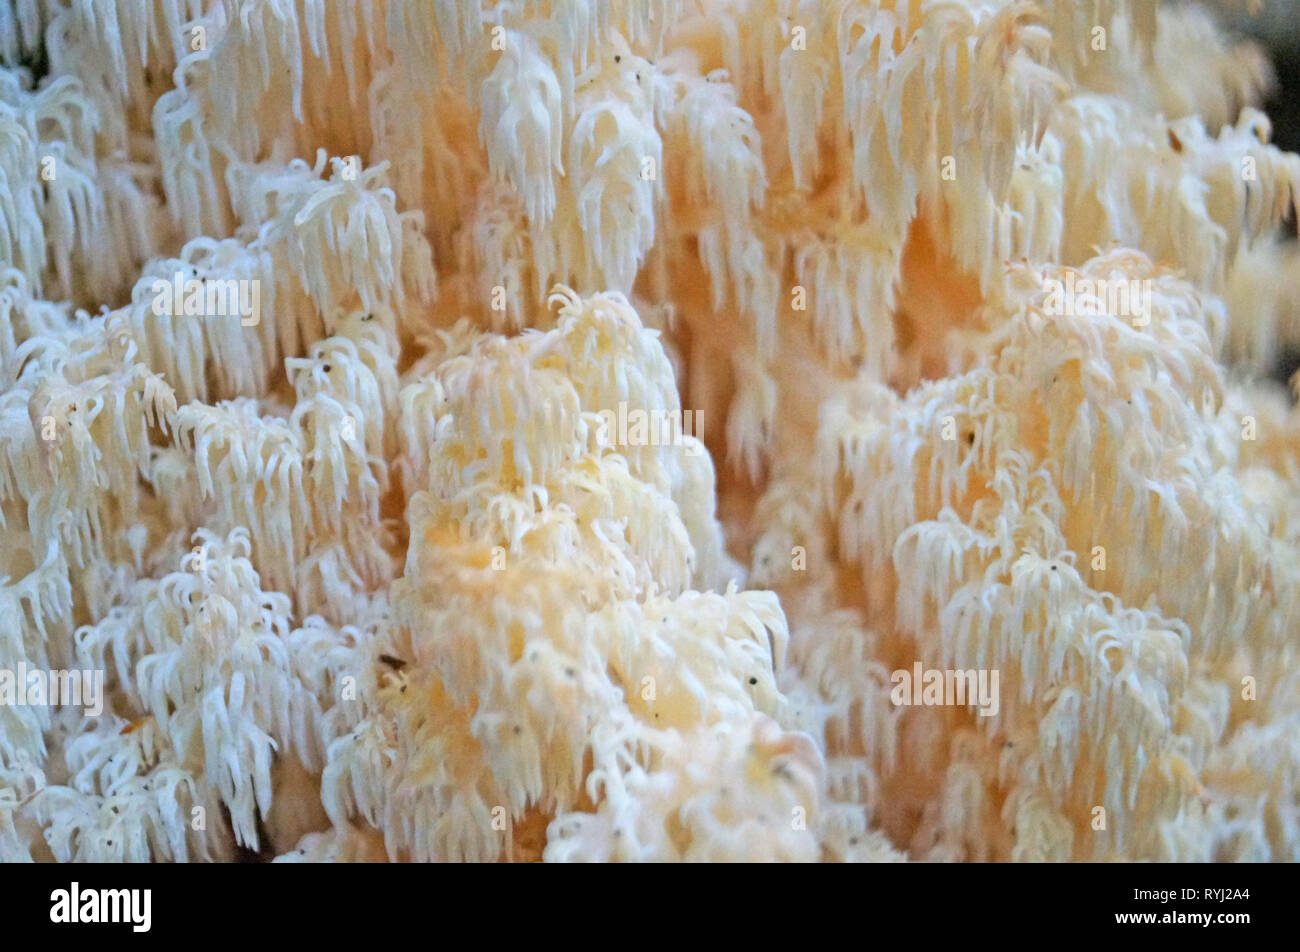 The white-colored mushroom Herícium coralloídes grows on a tree in the autumn forest. Stock Photo